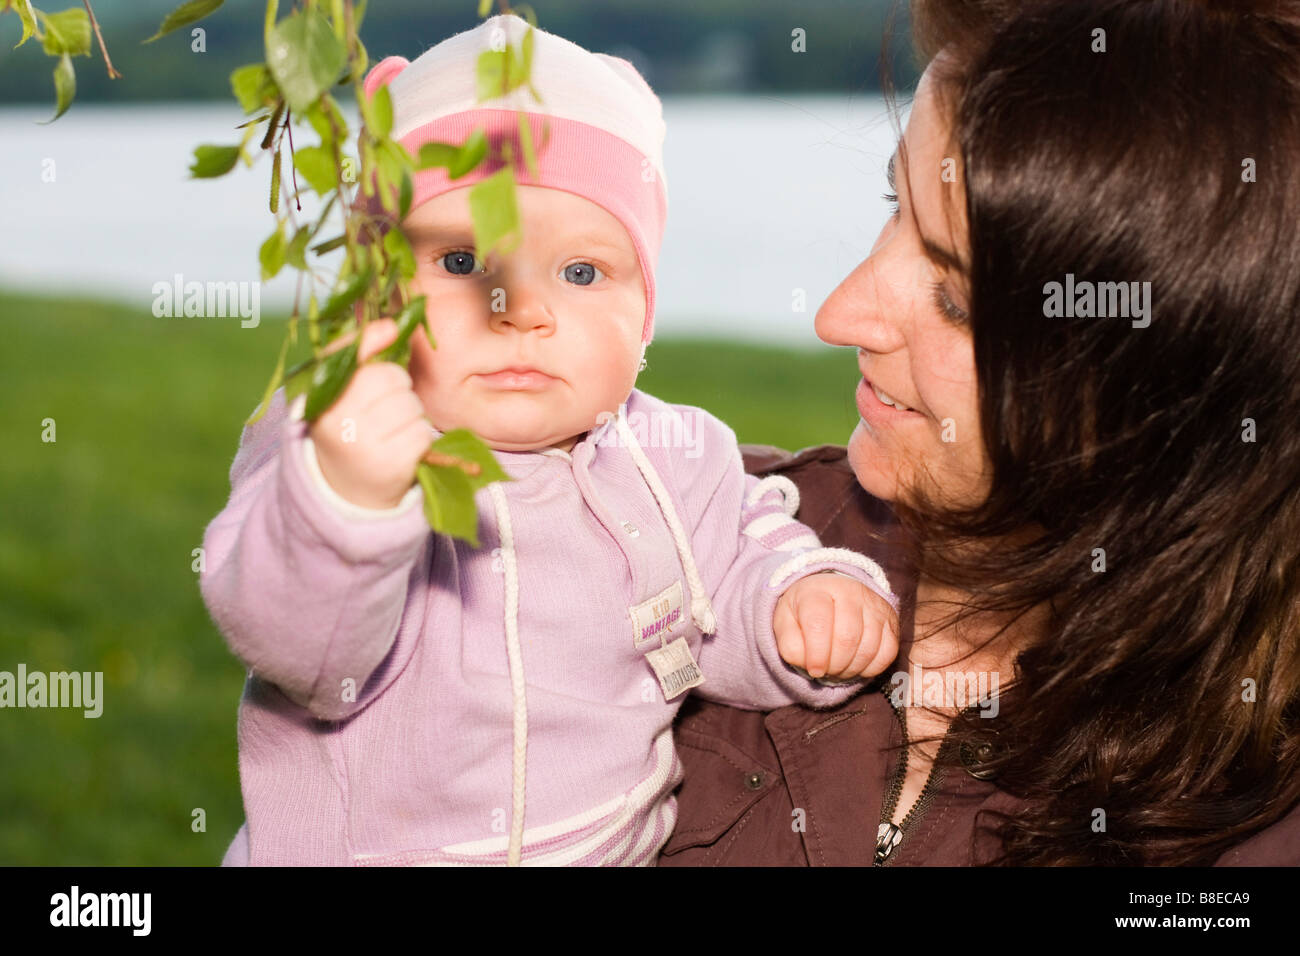 Mother 32 years old and her baby girl 9 months old outside Stock Photo